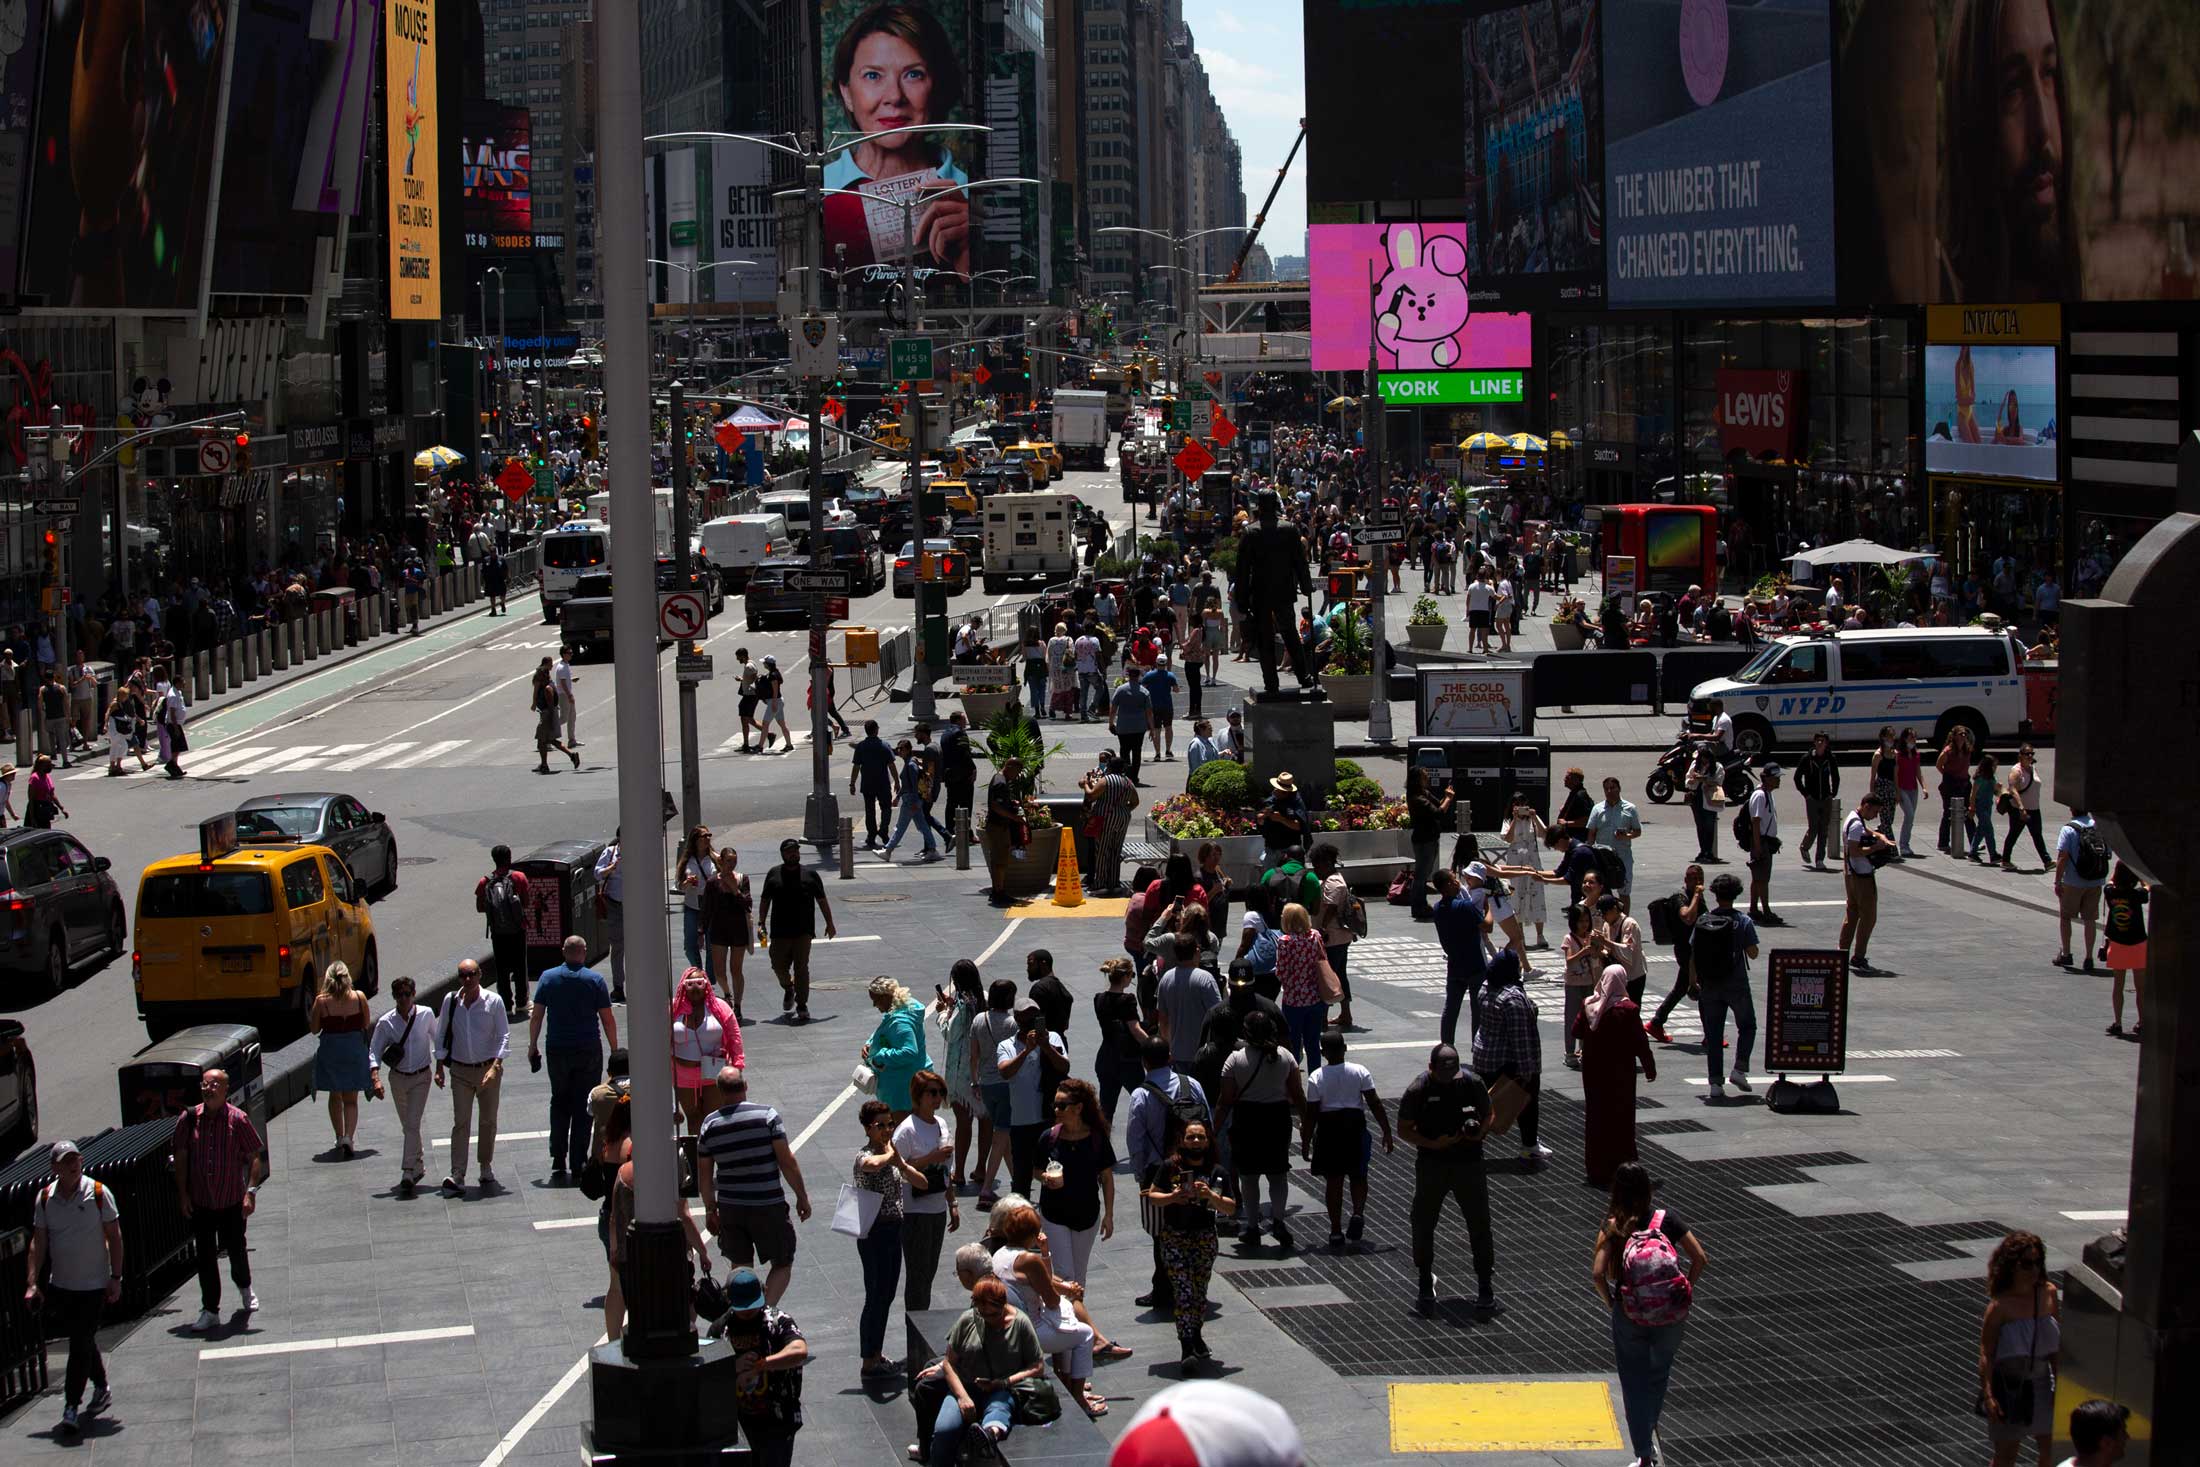 Crowds of people and traffic move through Times Square on a sunny day.